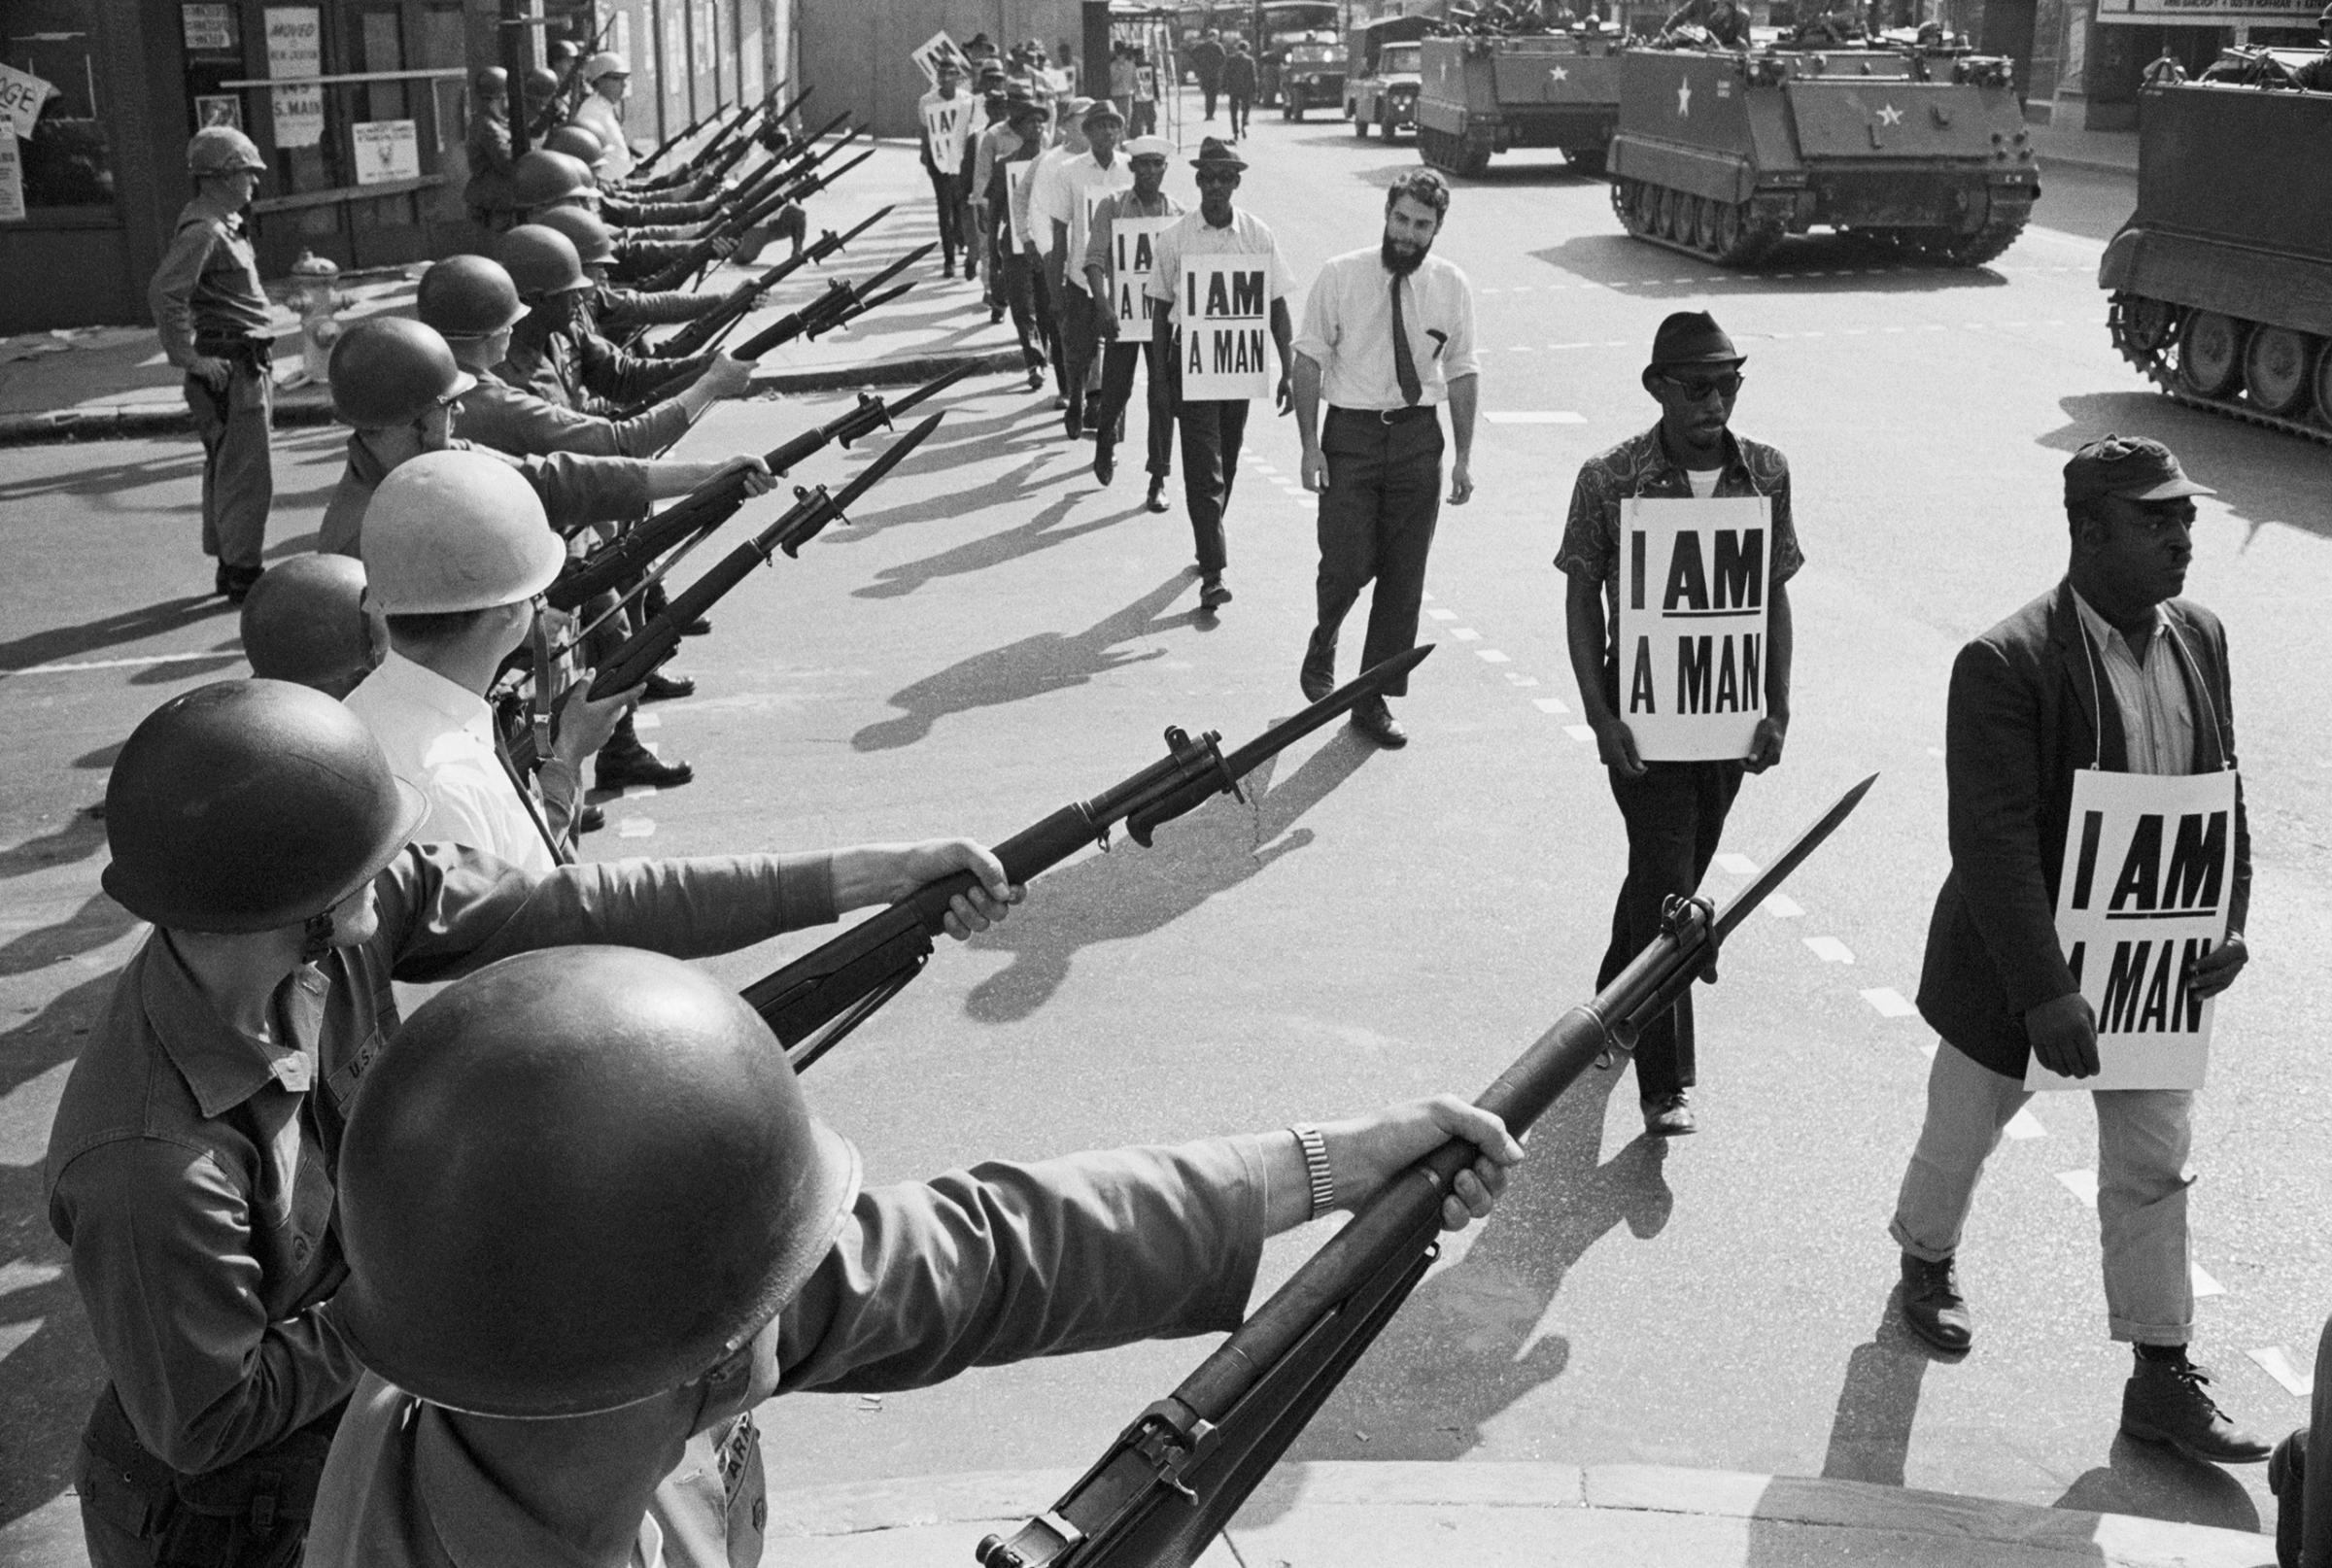 Soldiers at Civil Rights Protest in Memphis, 1968.